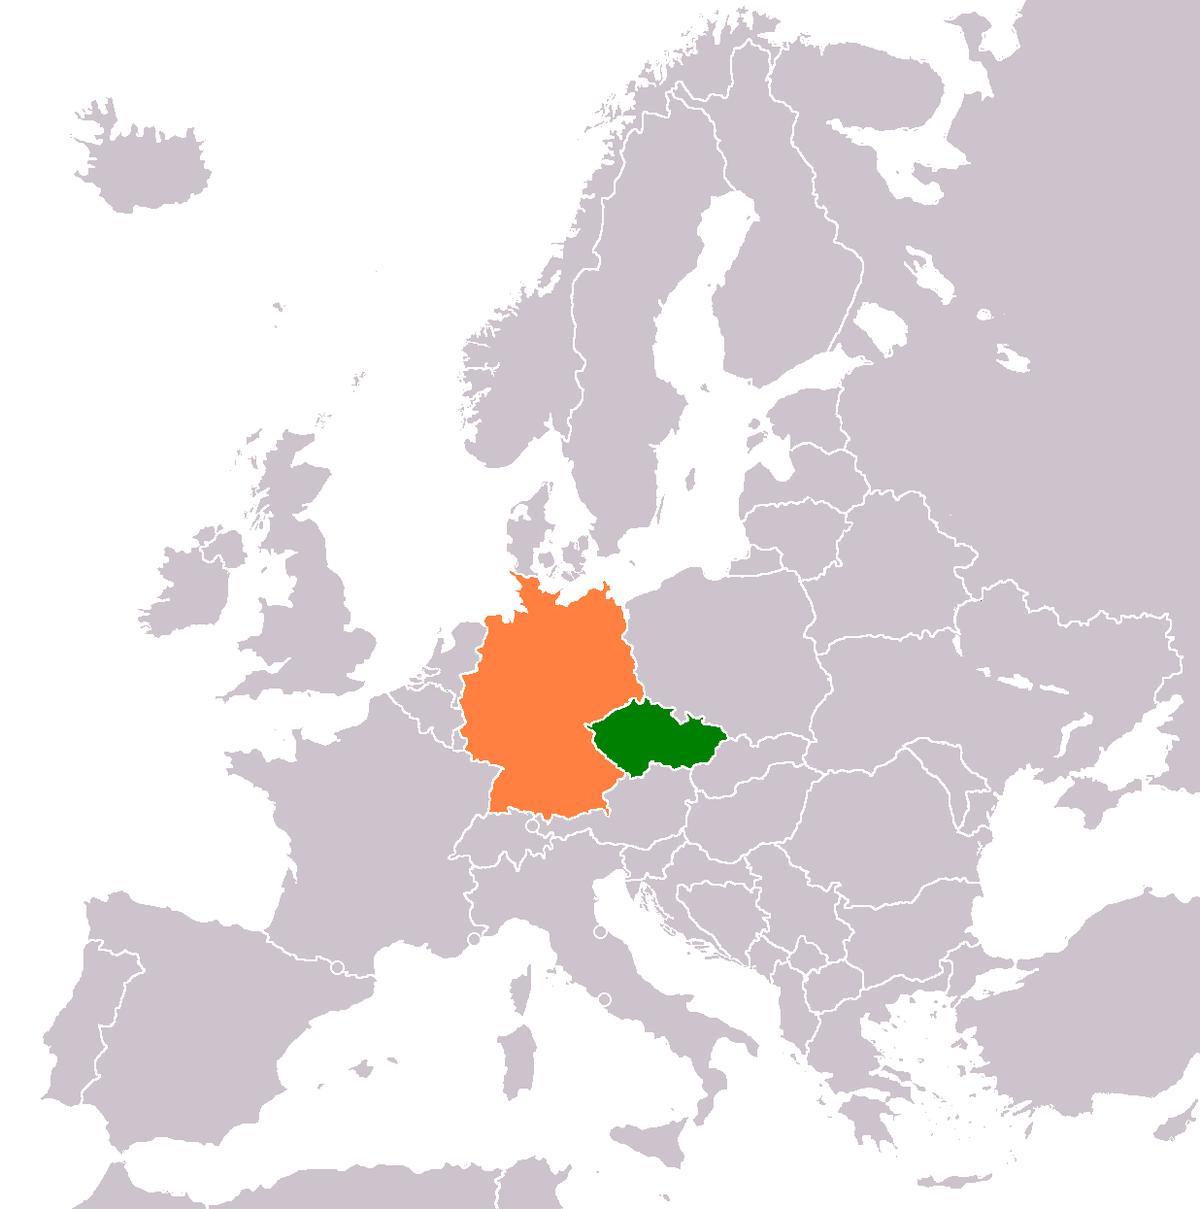 map of Czech republic and Germany